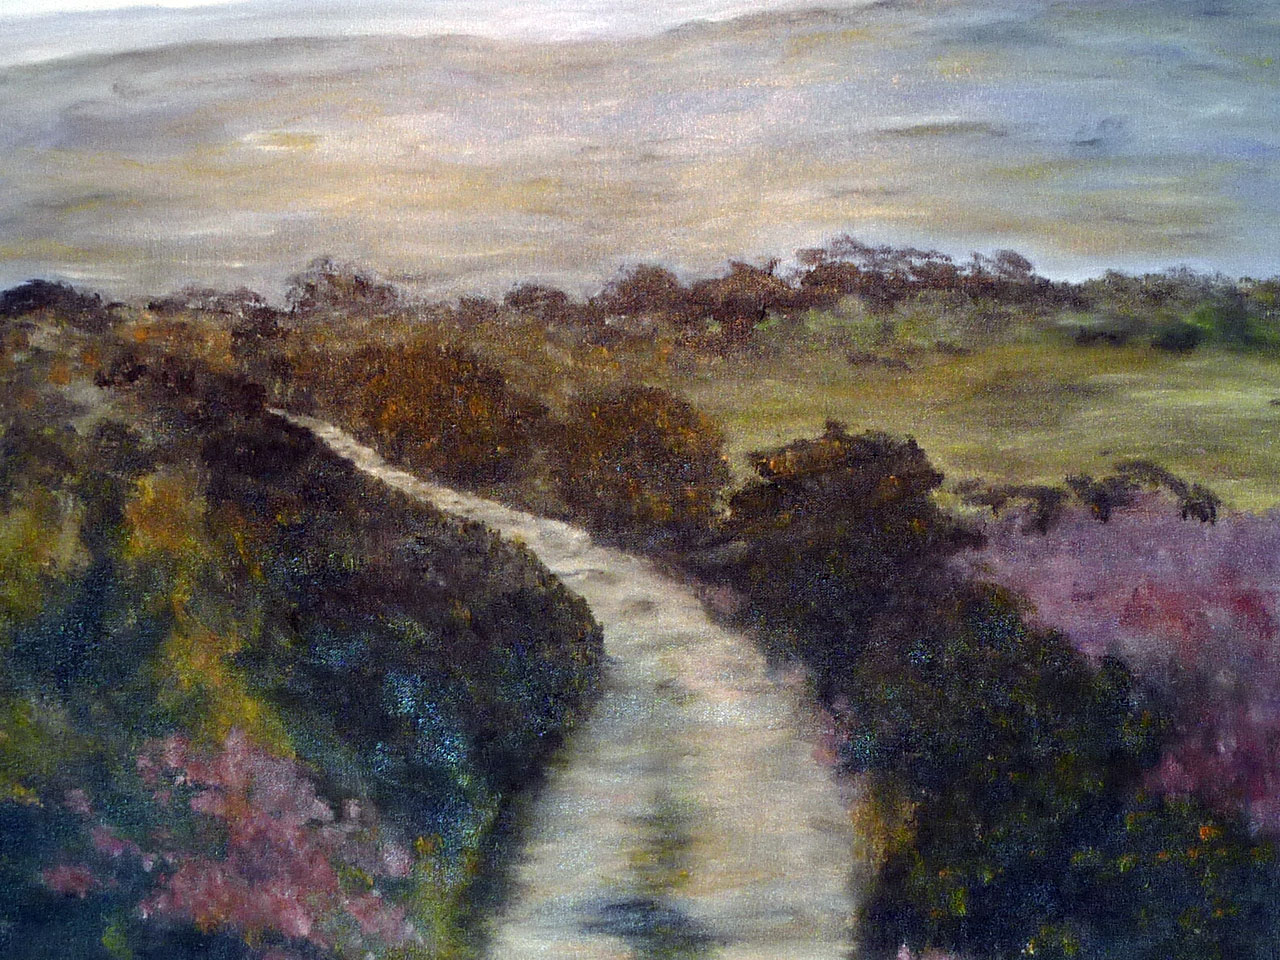 Original Artwork Paintings for Sale | Cullintra House Art Gallery | Patricia Cantlon Artist